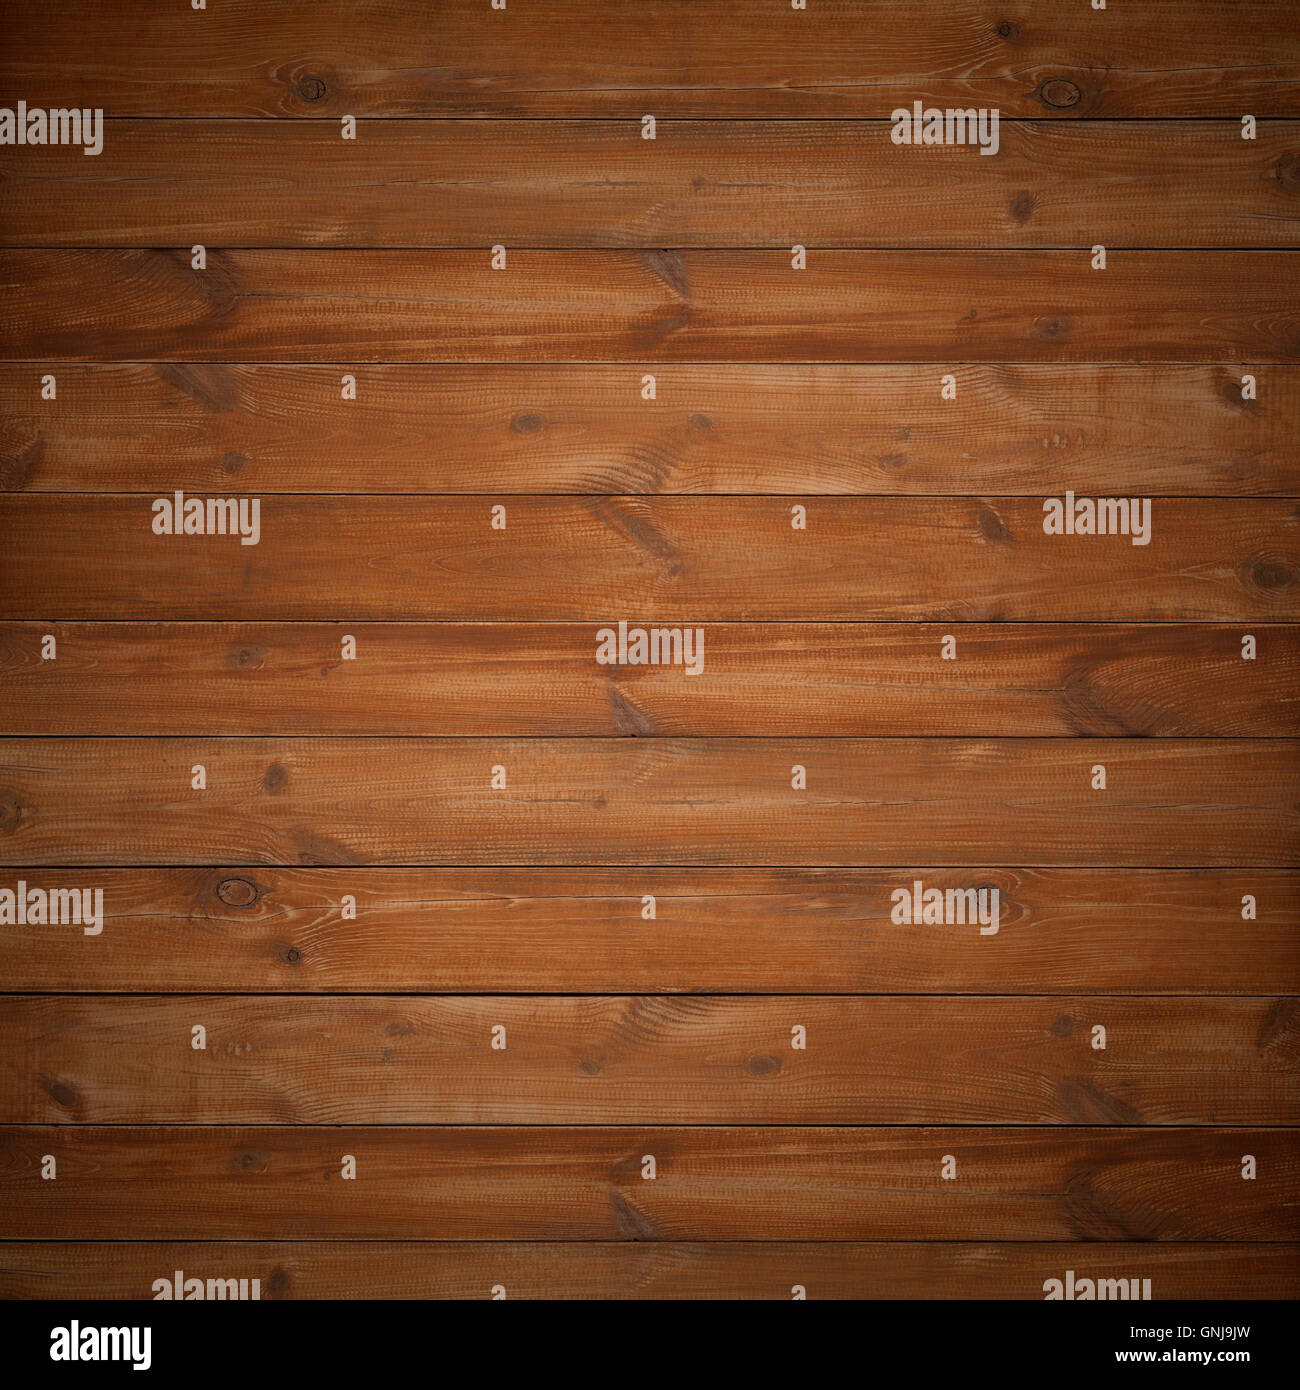 brown wood background on natural wooden texture Stock Photo